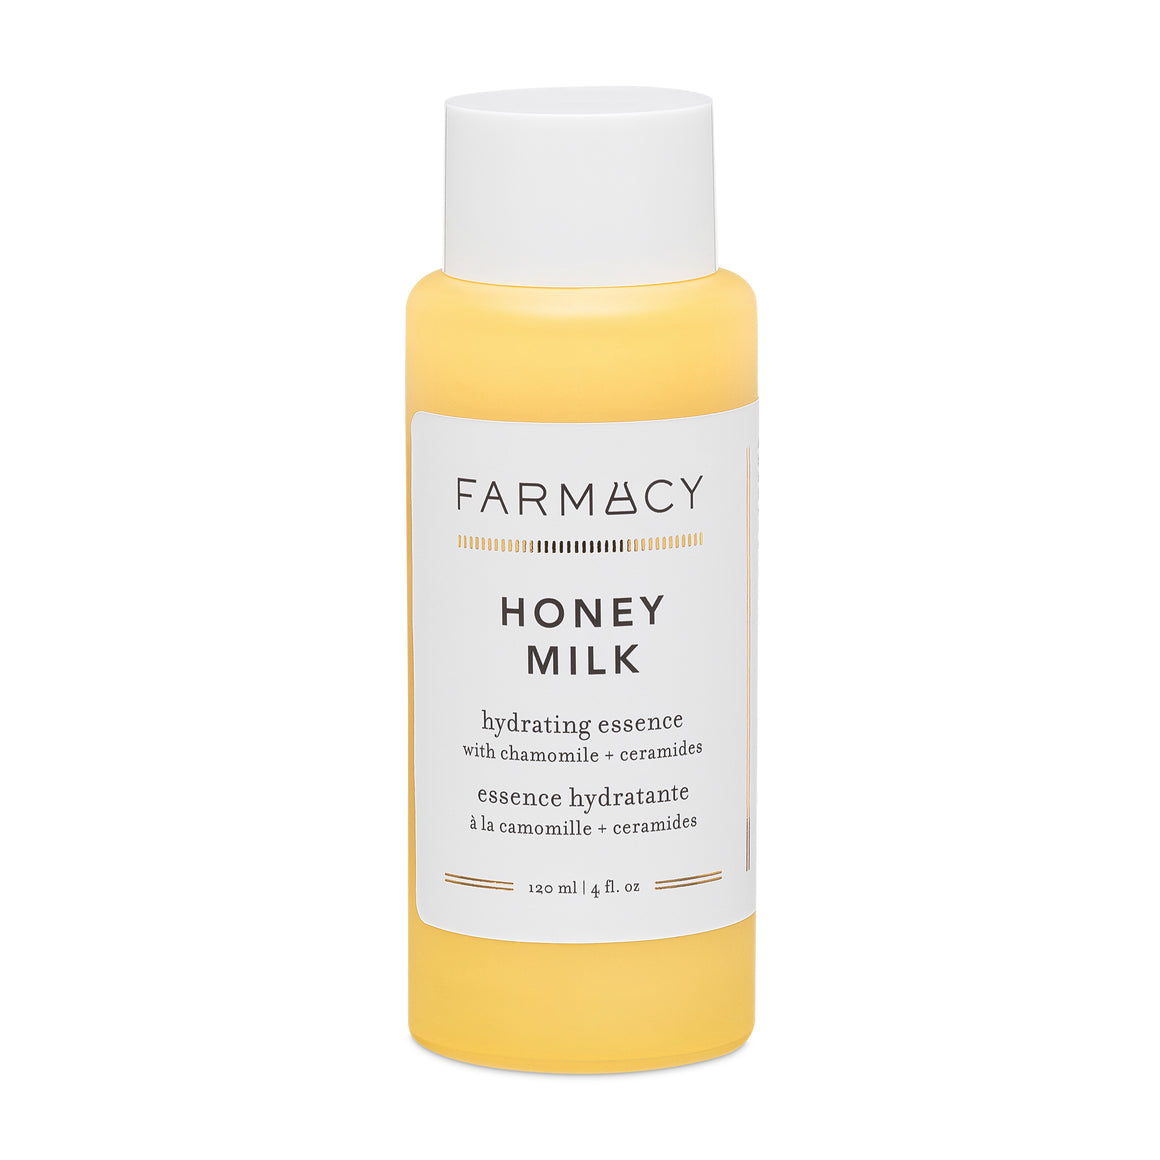 Shop All Farmacy Products